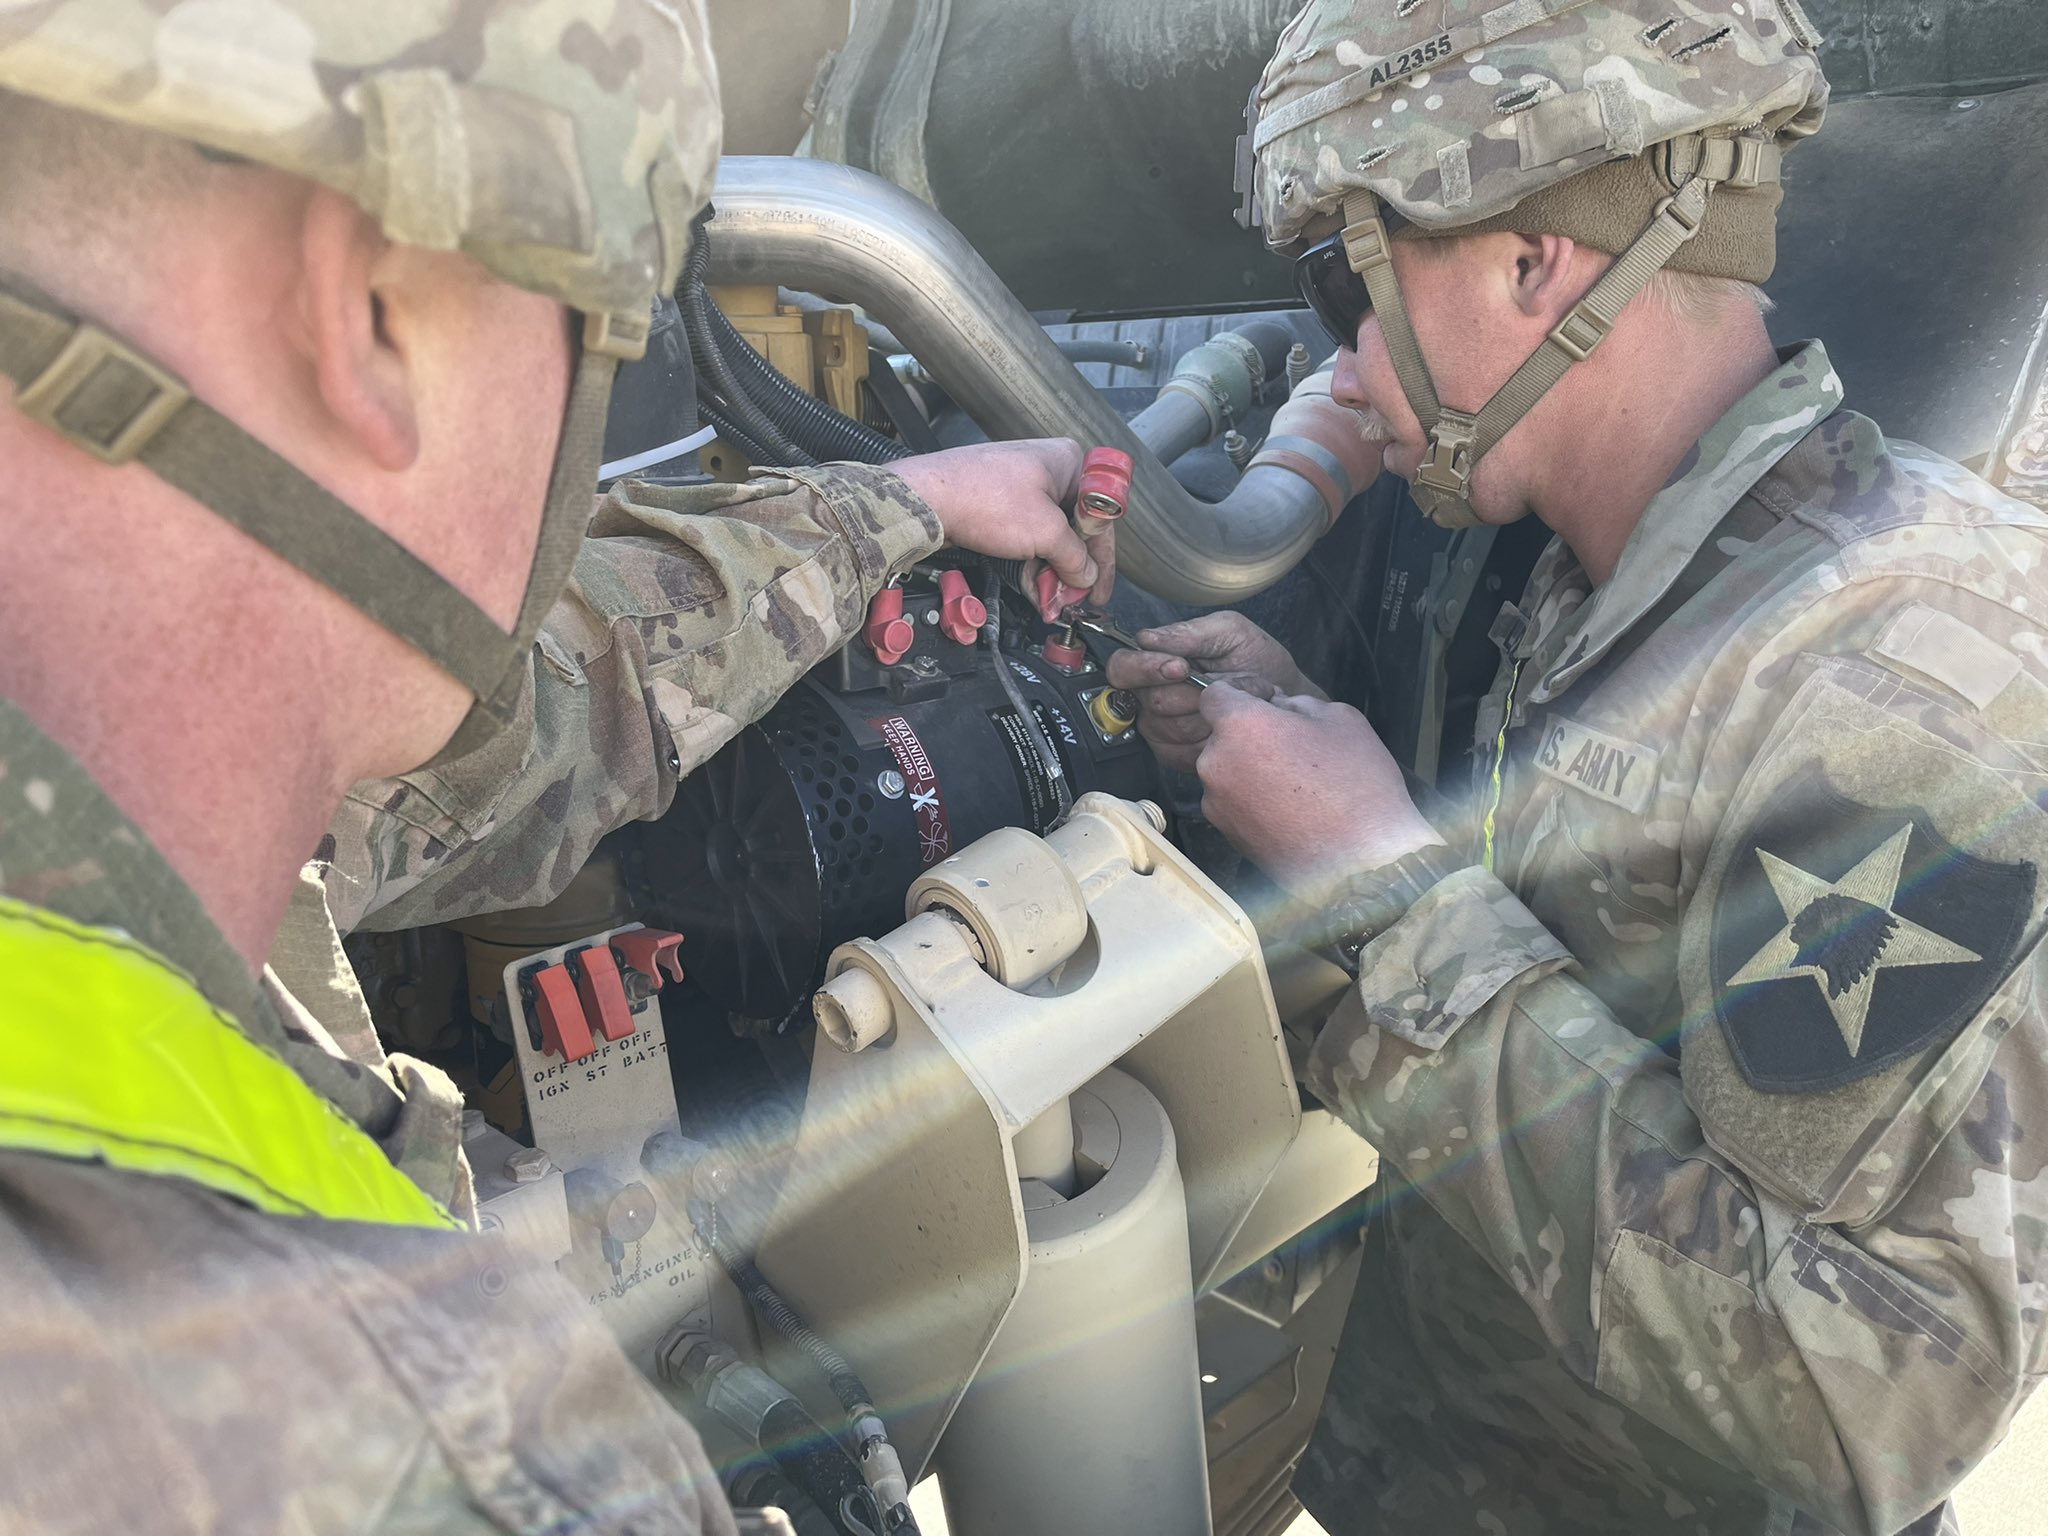 1 2 Stryker Brigade Combat Team Priorities Mechanics & Vehicle Operators Still Hard At Work At The National Training Center, Repairing & Maintaining Their Vehicles After A Month In